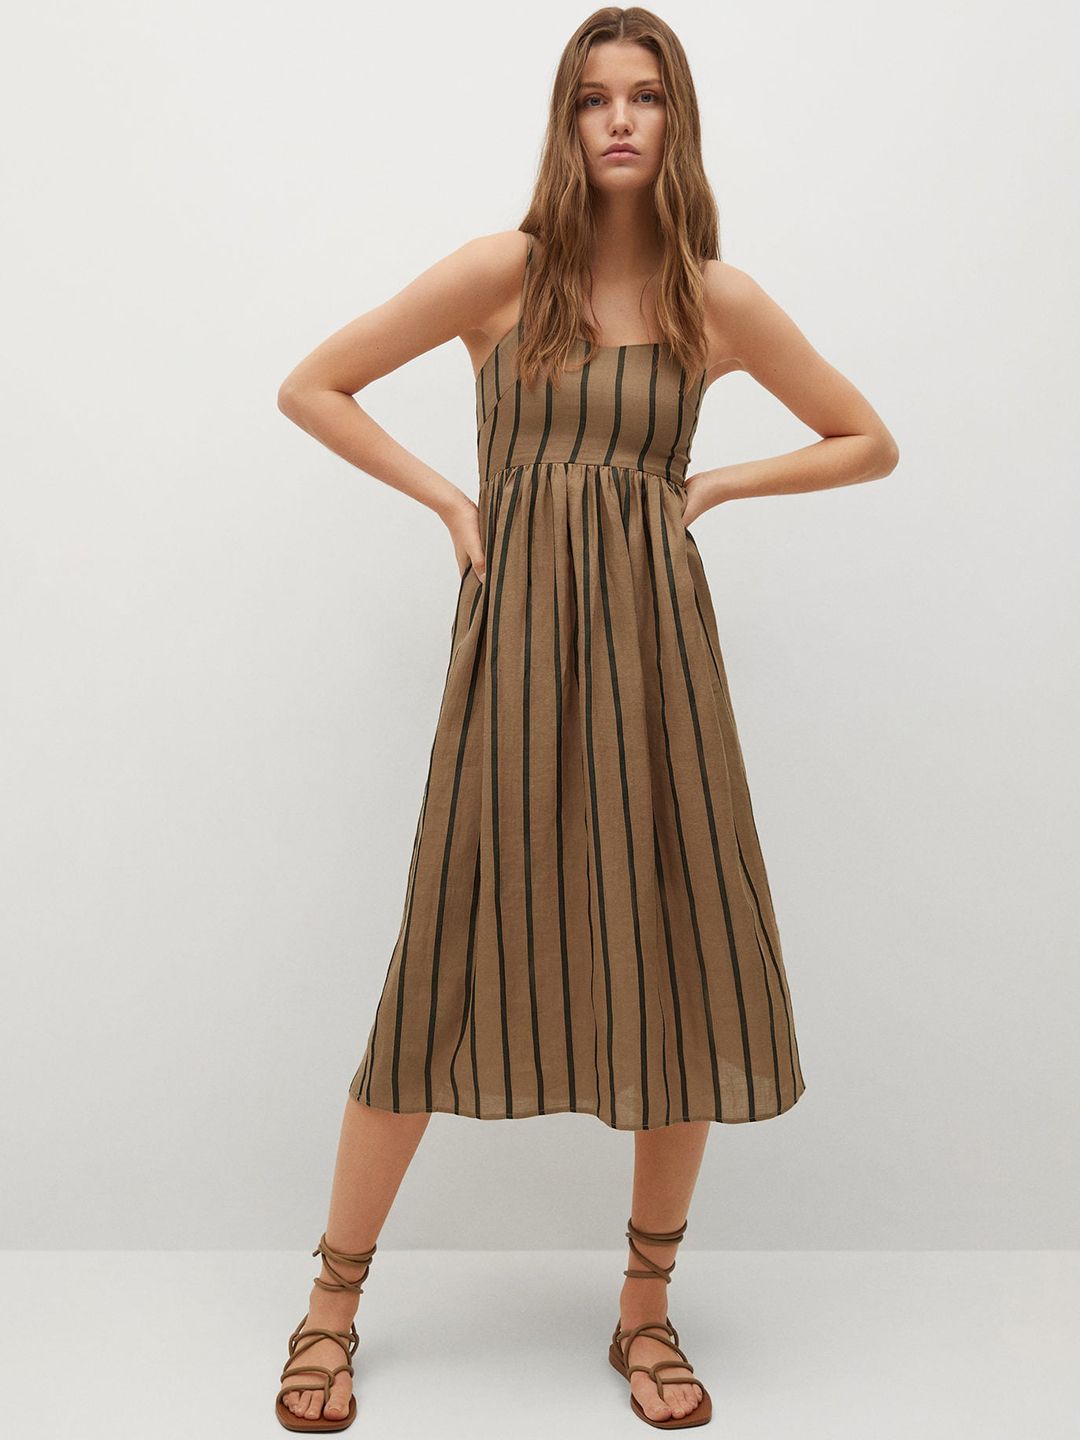 MANGO Brown & Black Sustainable Striped Linen A-Line Midi Dress Price in India